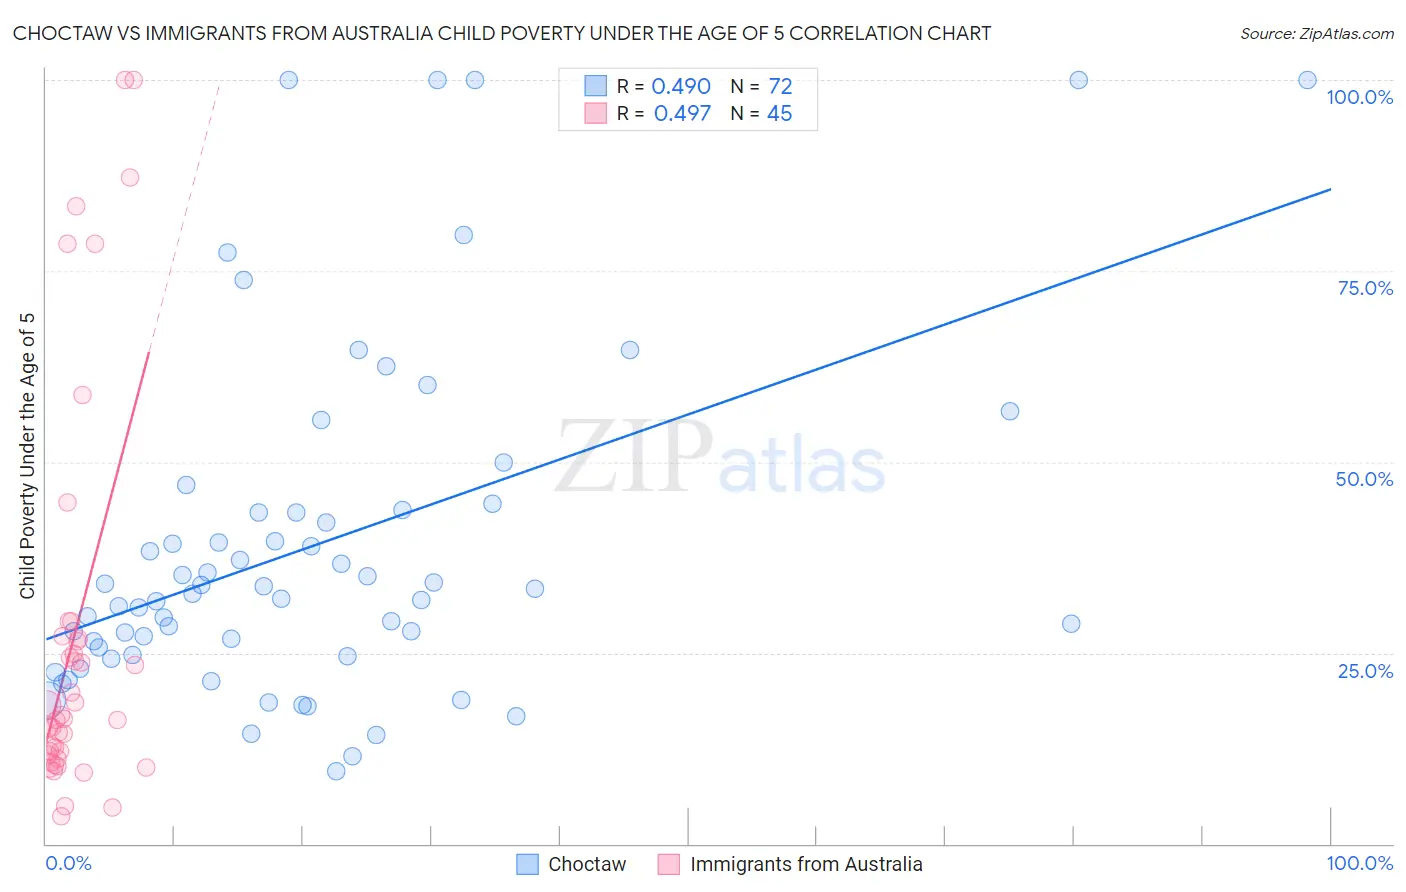 Choctaw vs Immigrants from Australia Child Poverty Under the Age of 5